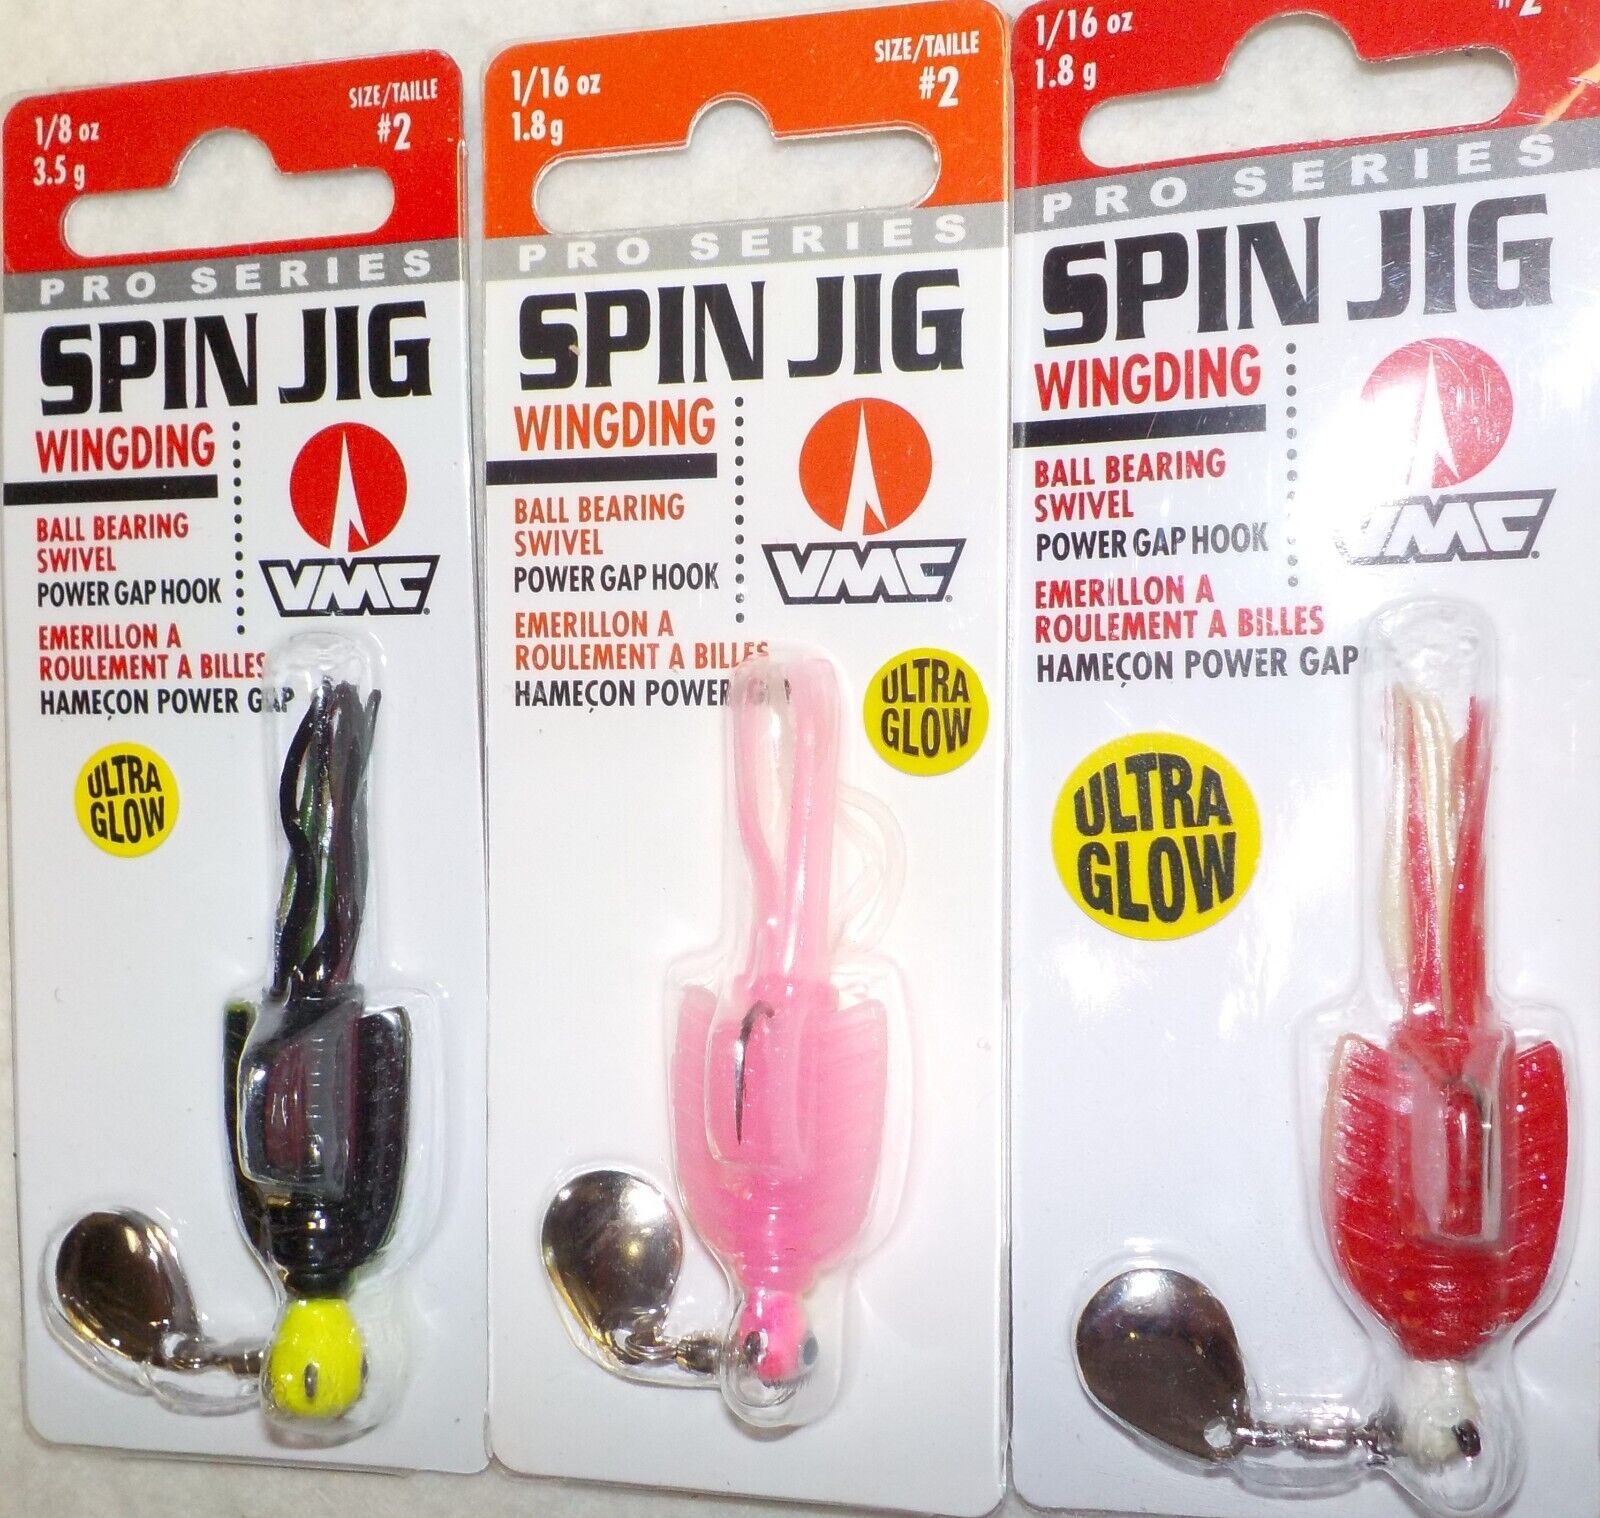 VMC WINGDIND SPIN CRAPPIE WALLEYE BASS FISHING LURE JIGS CHOICE